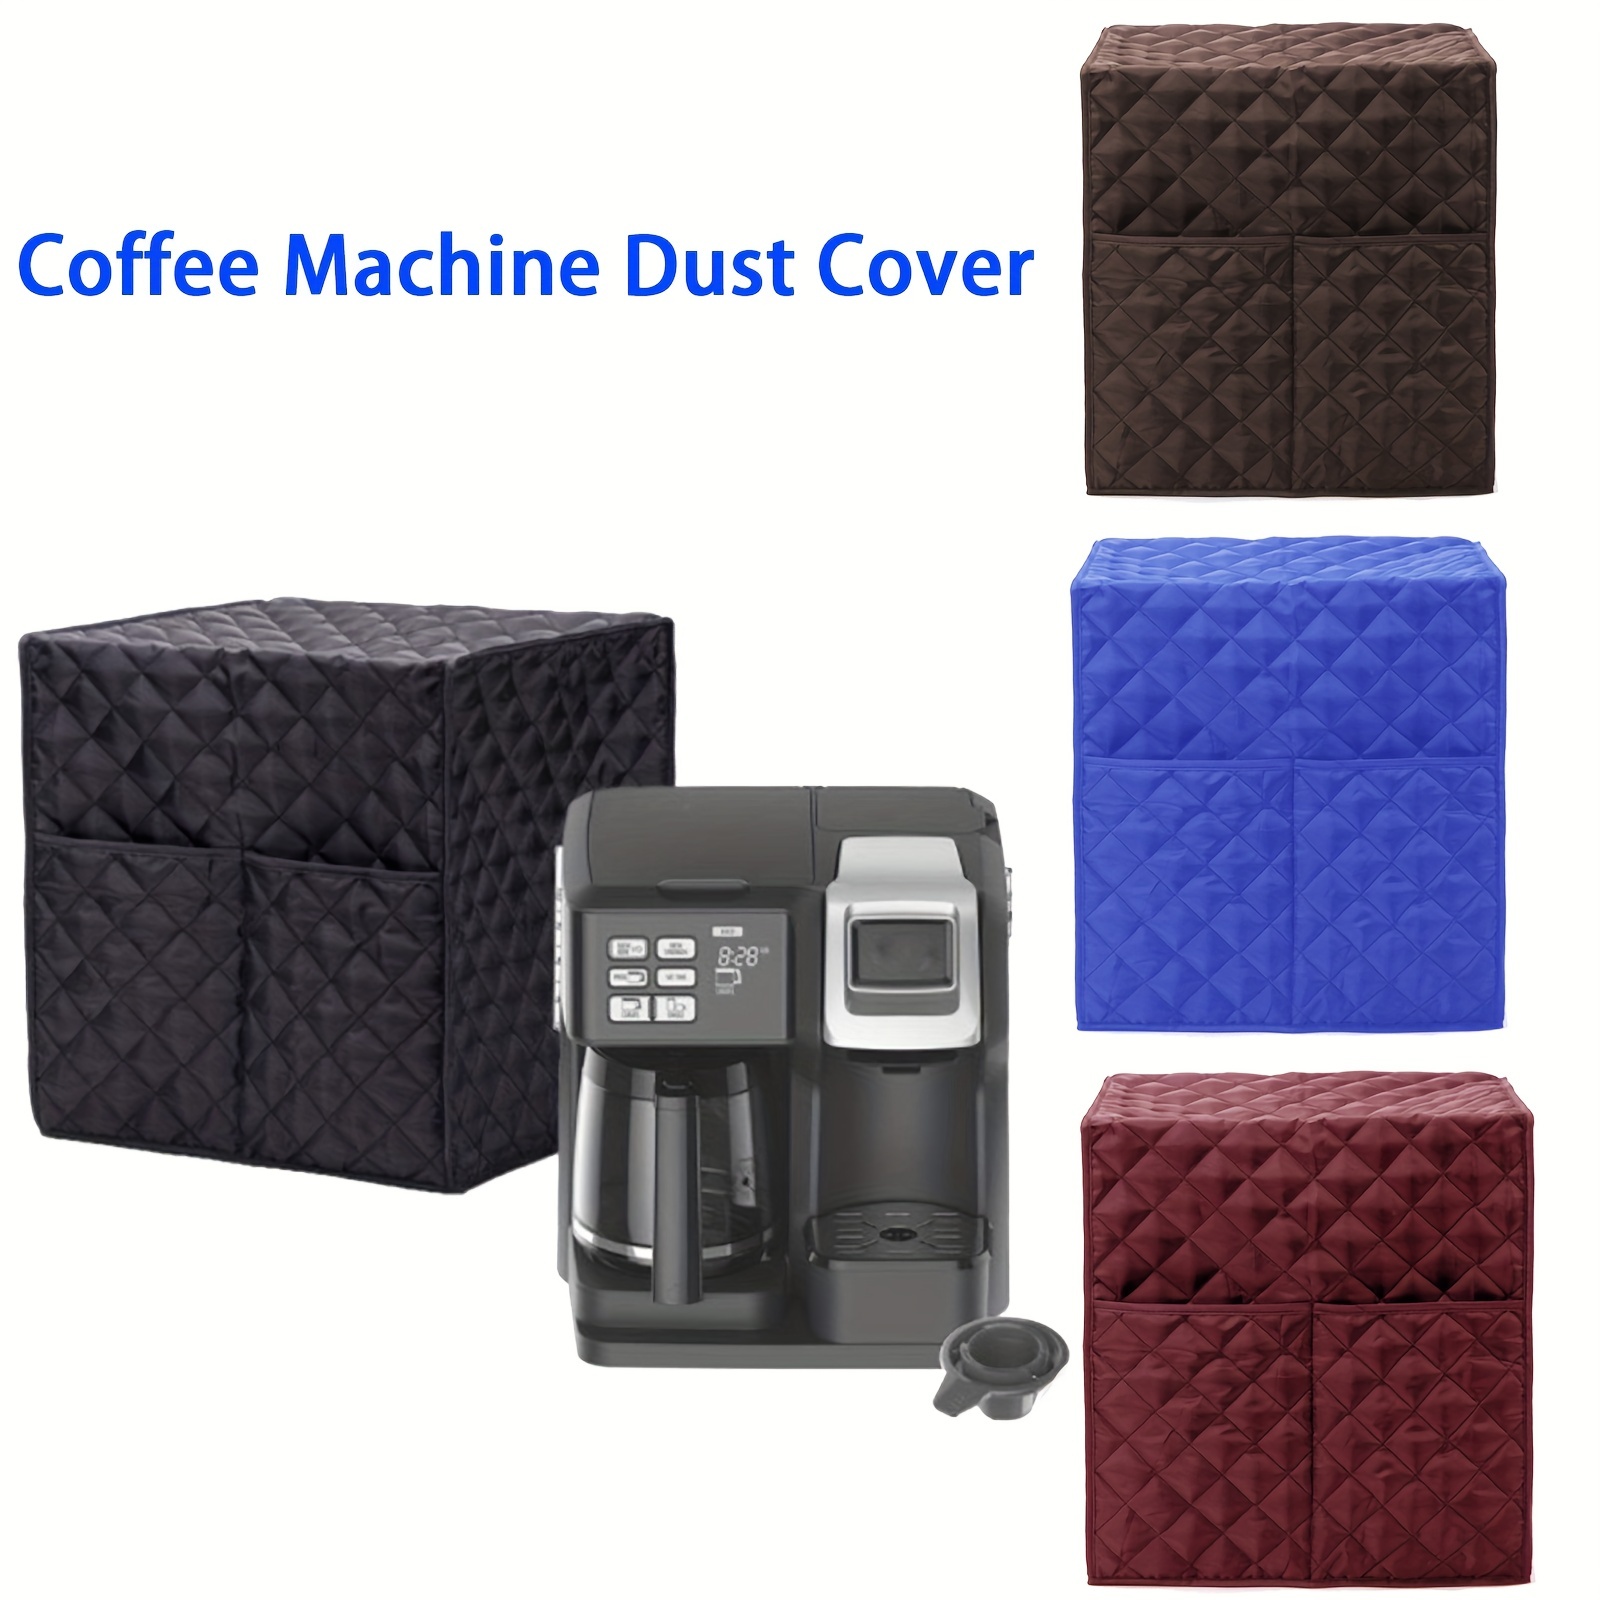  Ocean Underwater Shark Coral Coffee Maker Dust Cover,  Waterproof Stand Mixer Cover Coffee Machine Dust Cover, Home Small  Appliance Guard Aid Assecories Protector for Kitchen Appliance 17in: Home &  Kitchen